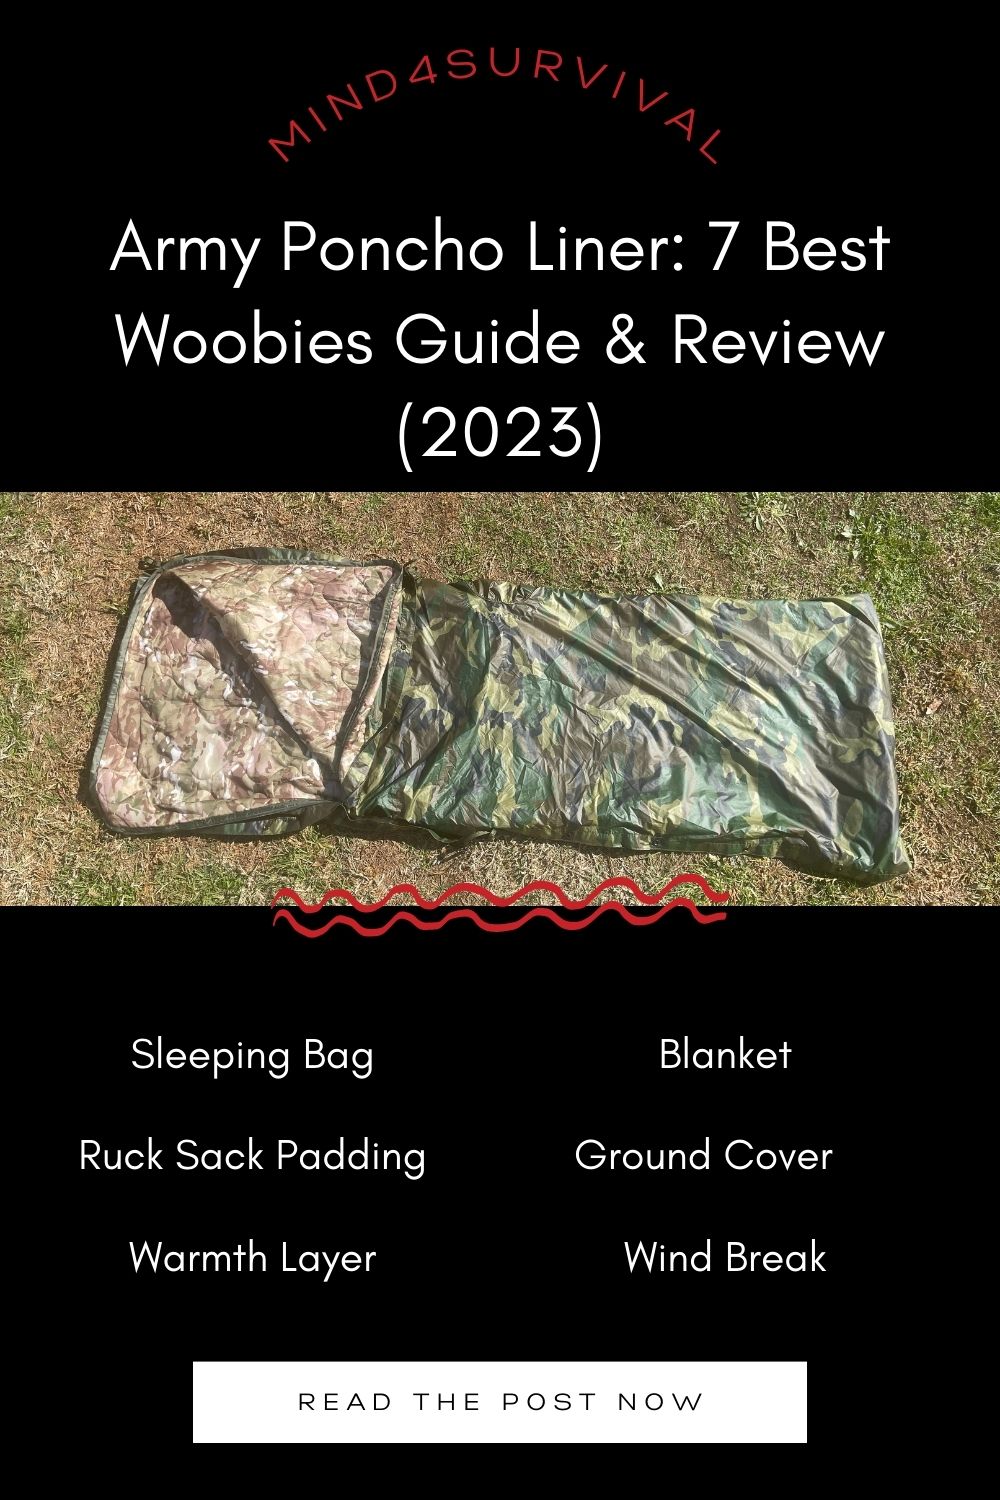 The Best Army Poncho Liner | Woobie Guide & Review (2023)